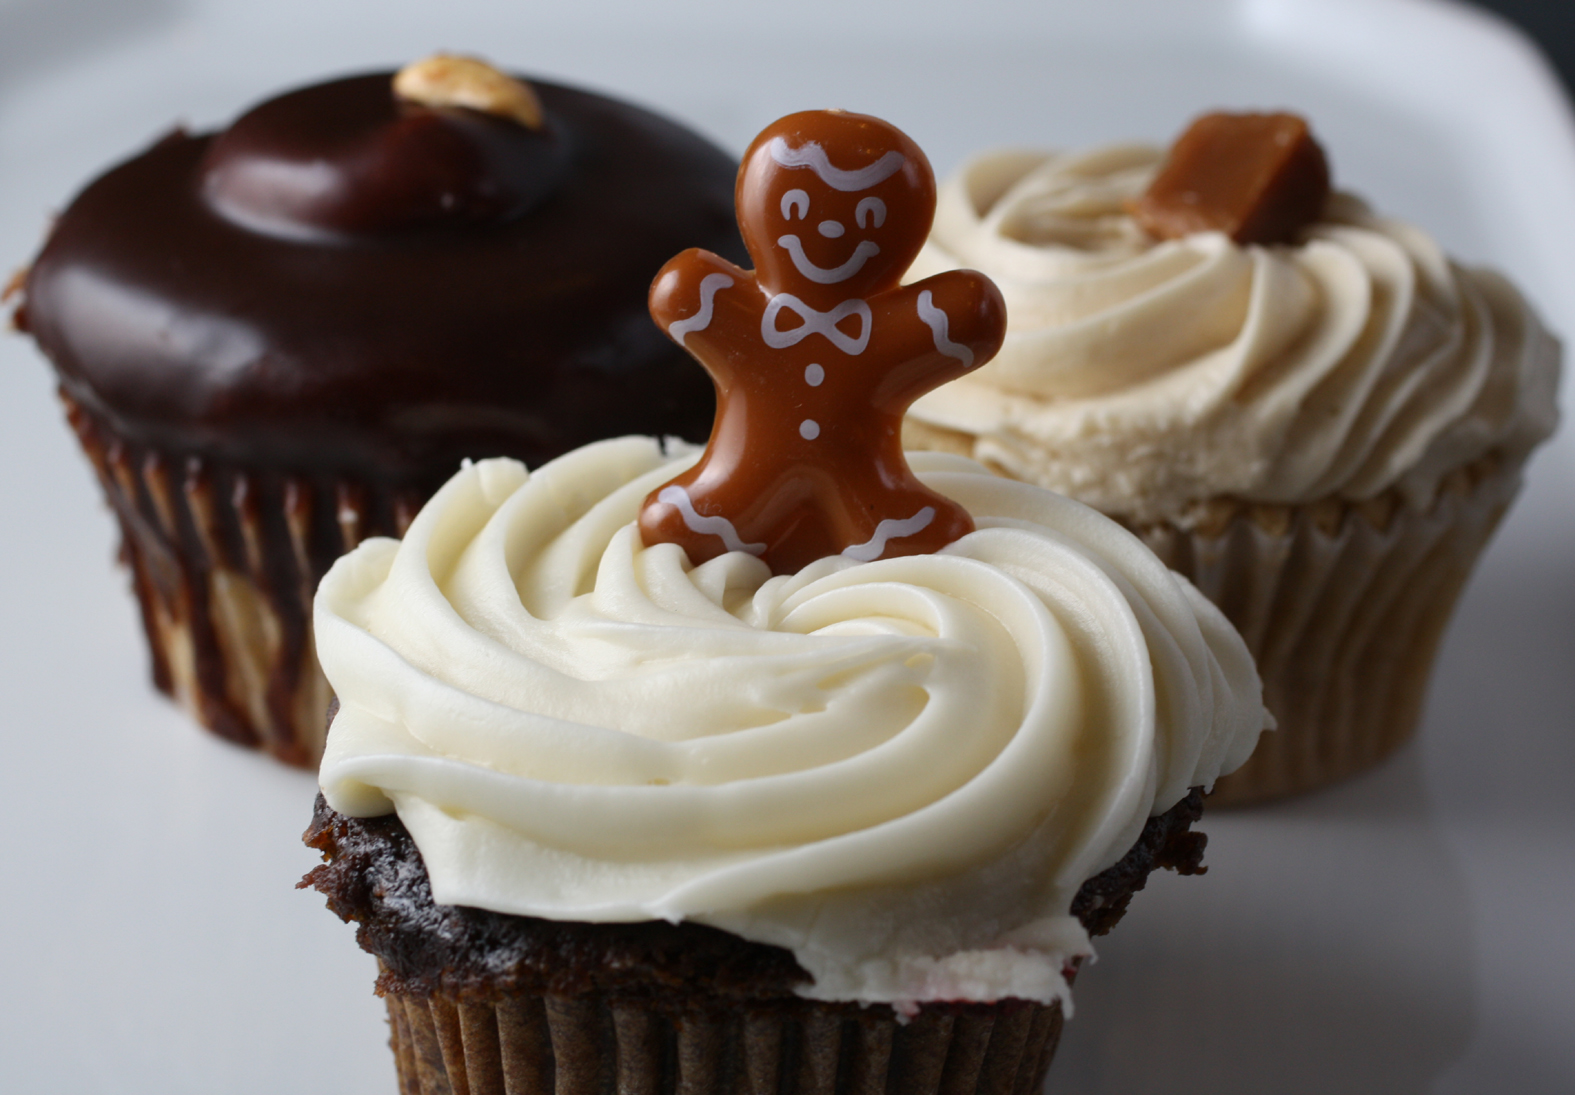 (Clockwise, from back): Peanut butter, caramel, and gingerbread cupcakes.